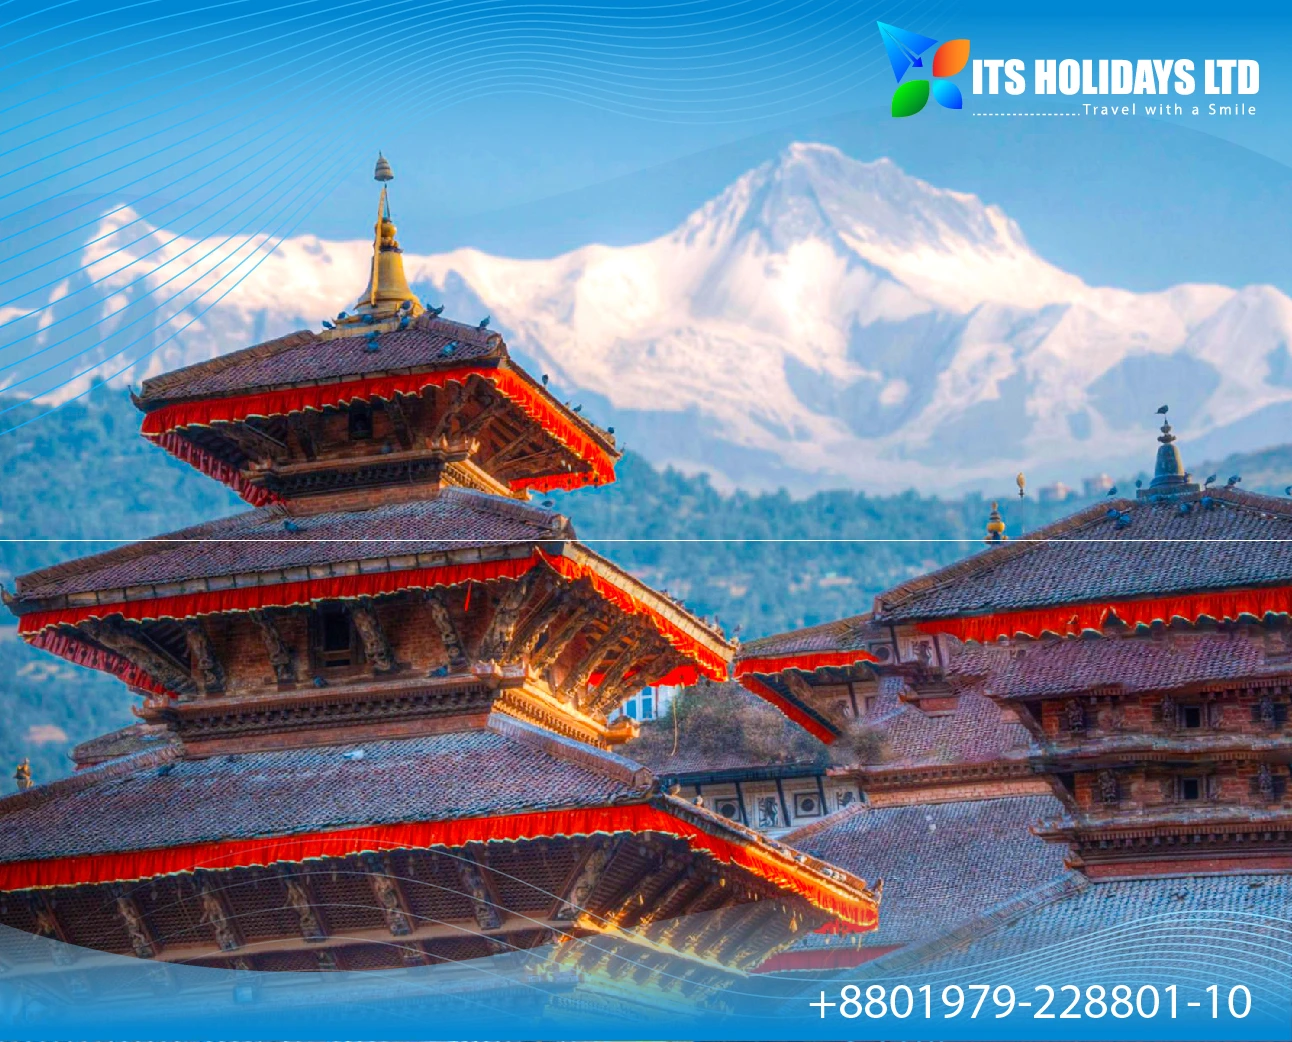 Best Selling Nepal Tour Package from Bangladesh - 02